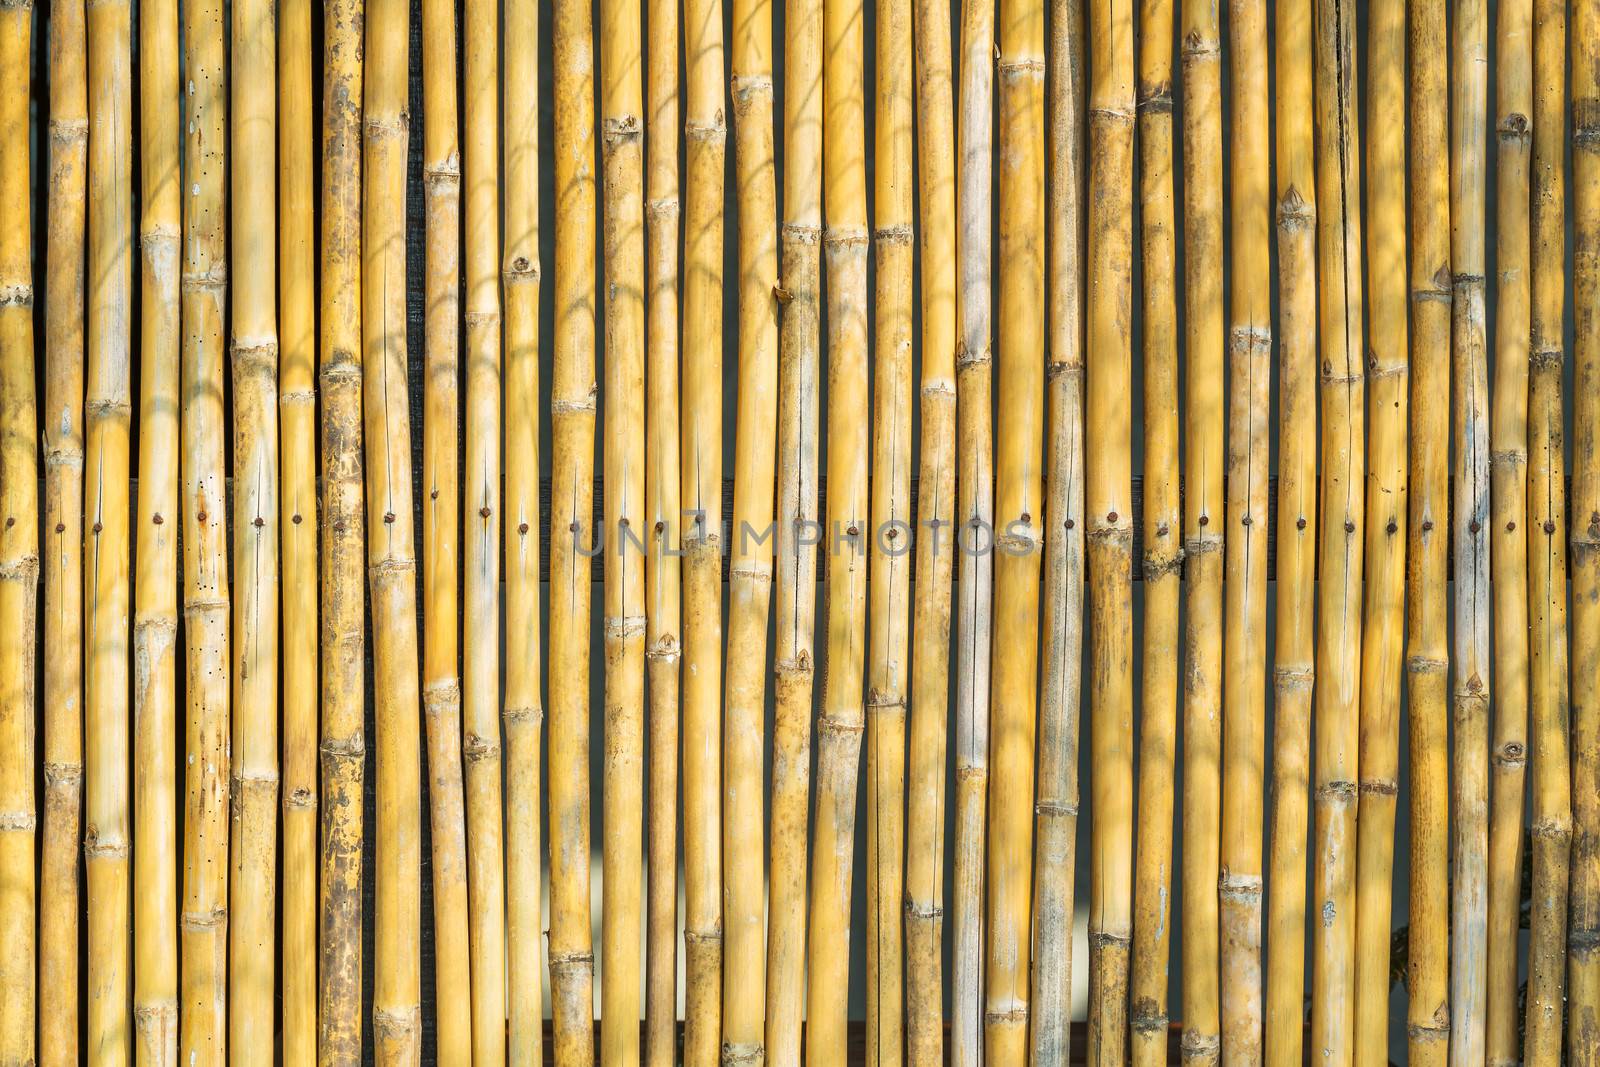 Fence decoration by yellow bamboo